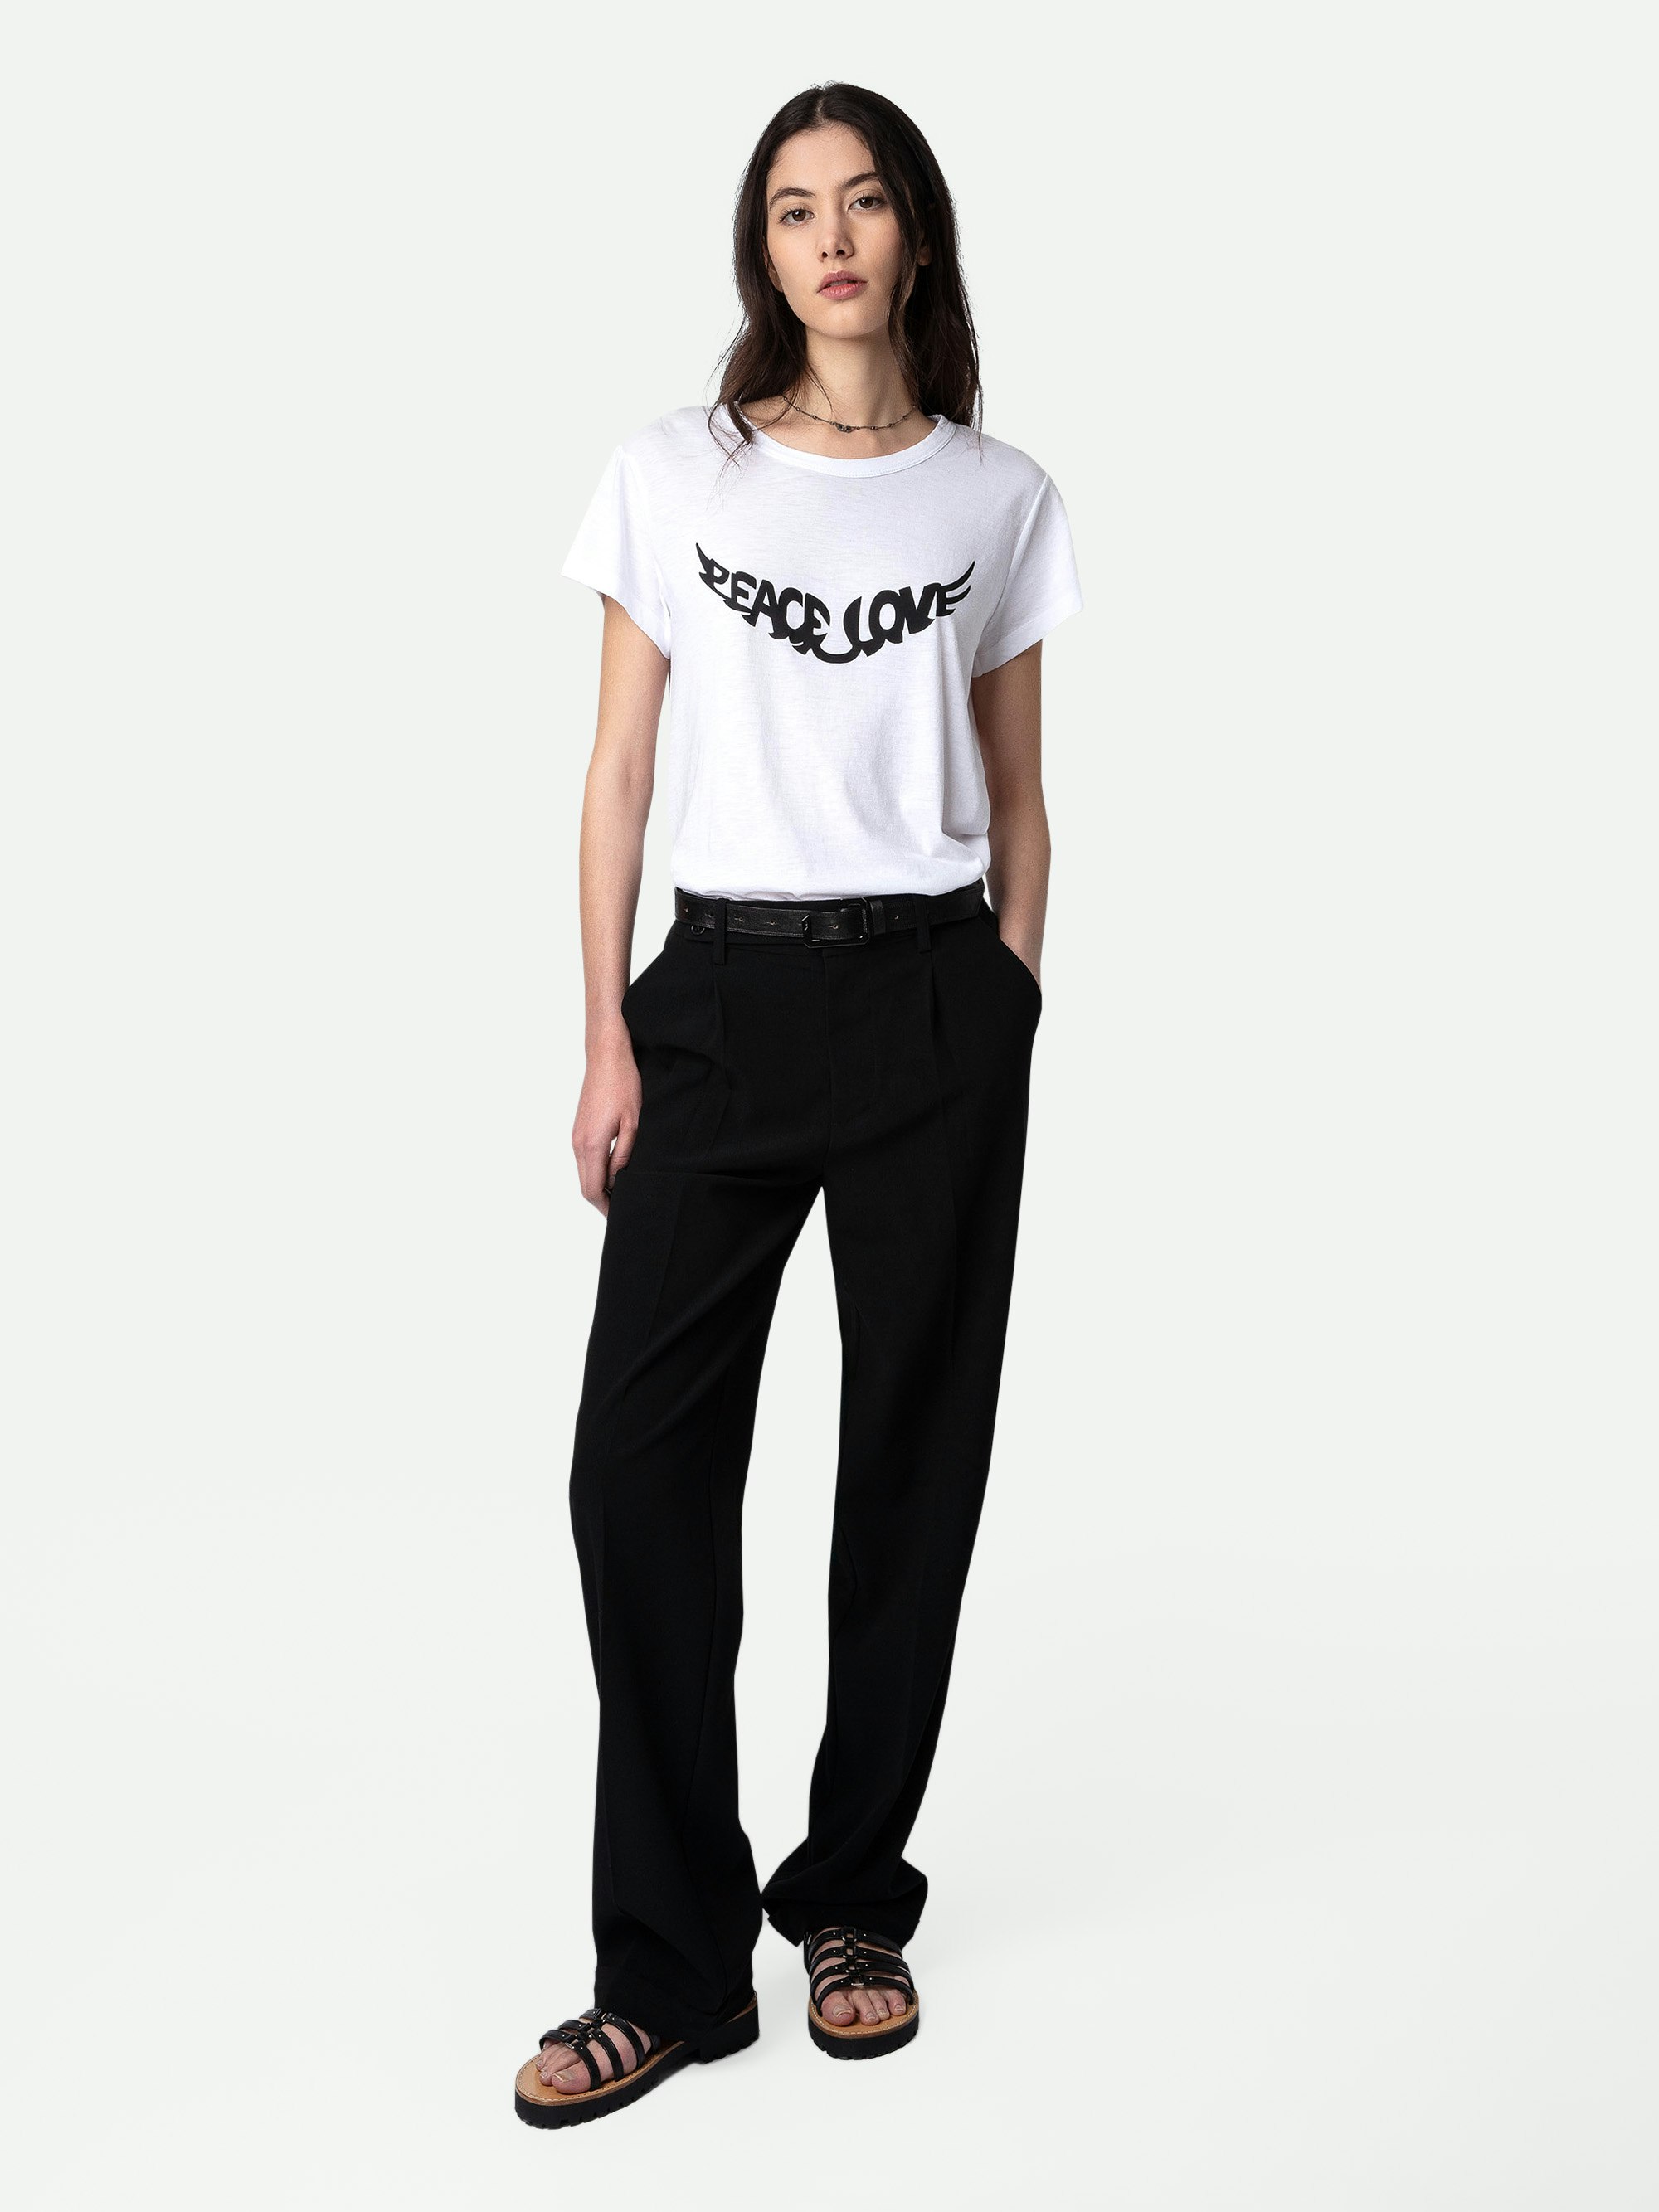 Women's luxury and trendy t-shirts and henley tops | Zadig&Voltaire